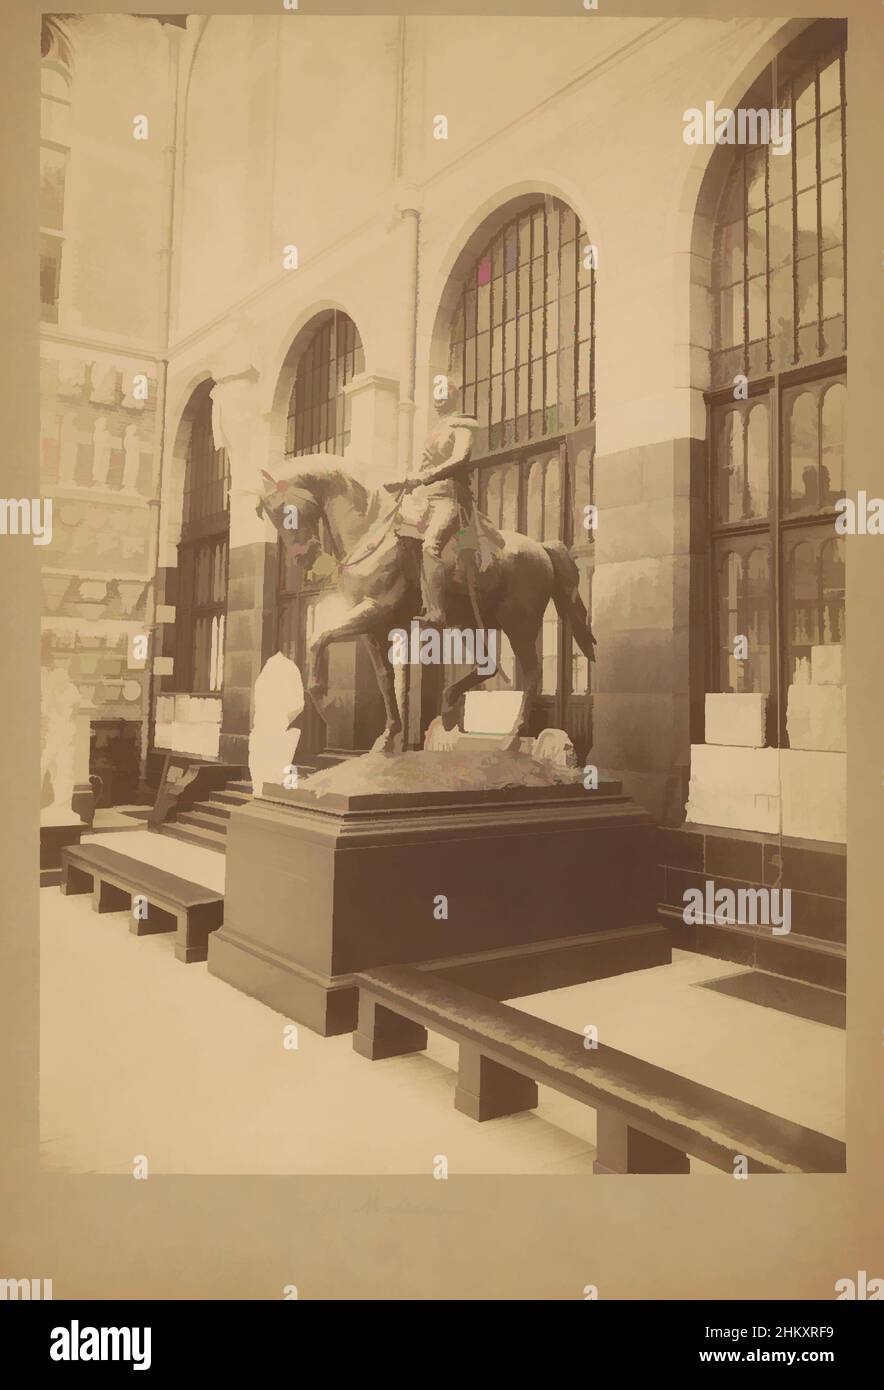 Art inspired by Model of the equestrian statue of King William II in the Rijksmuseum in Amsterdam, Rijksmuseum Amsterdam, c. 1875 - c. 1900, cardboard, albumen print, height 401 mm × width 278 mm, Classic works modernized by Artotop with a splash of modernity. Shapes, color and value, eye-catching visual impact on art. Emotions through freedom of artworks in a contemporary way. A timeless message pursuing a wildly creative new direction. Artists turning to the digital medium and creating the Artotop NFT Stock Photo